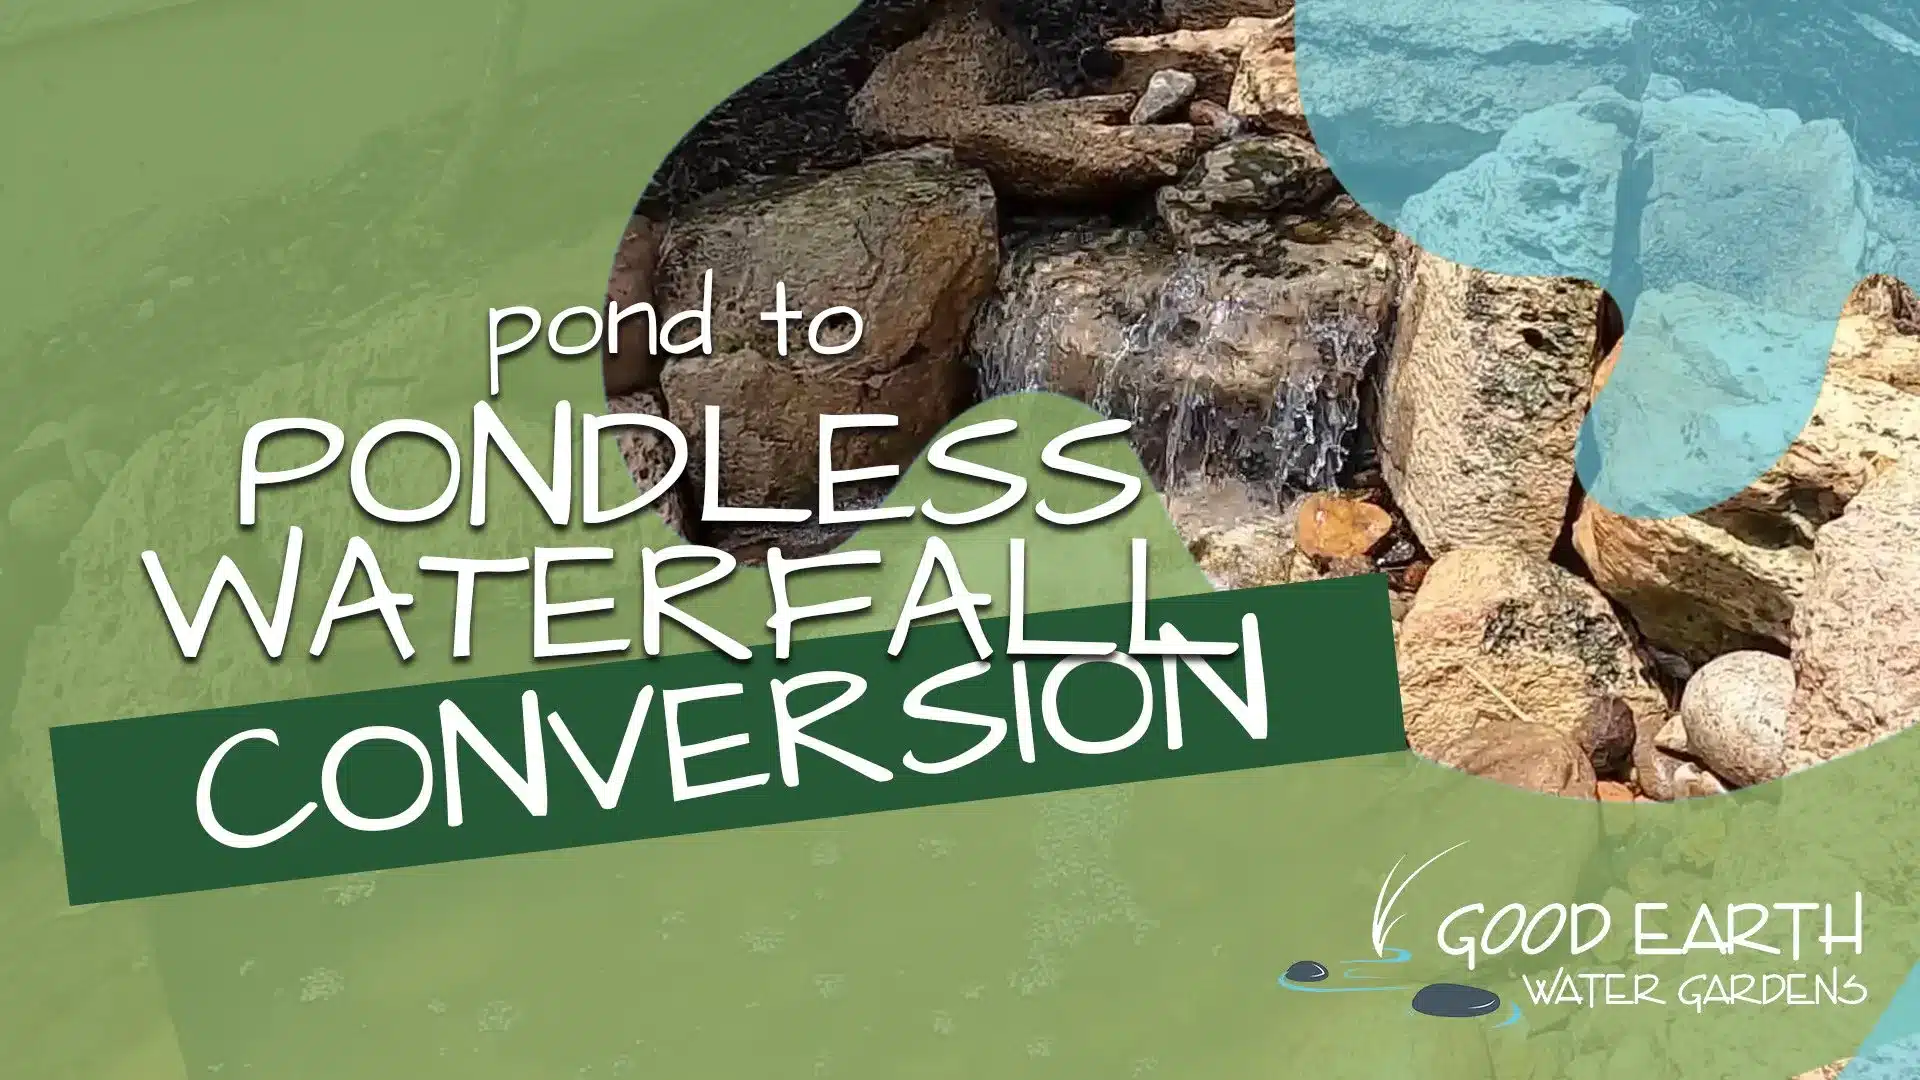 Project Showcase: Converting a Pond to a Pondless Waterfall